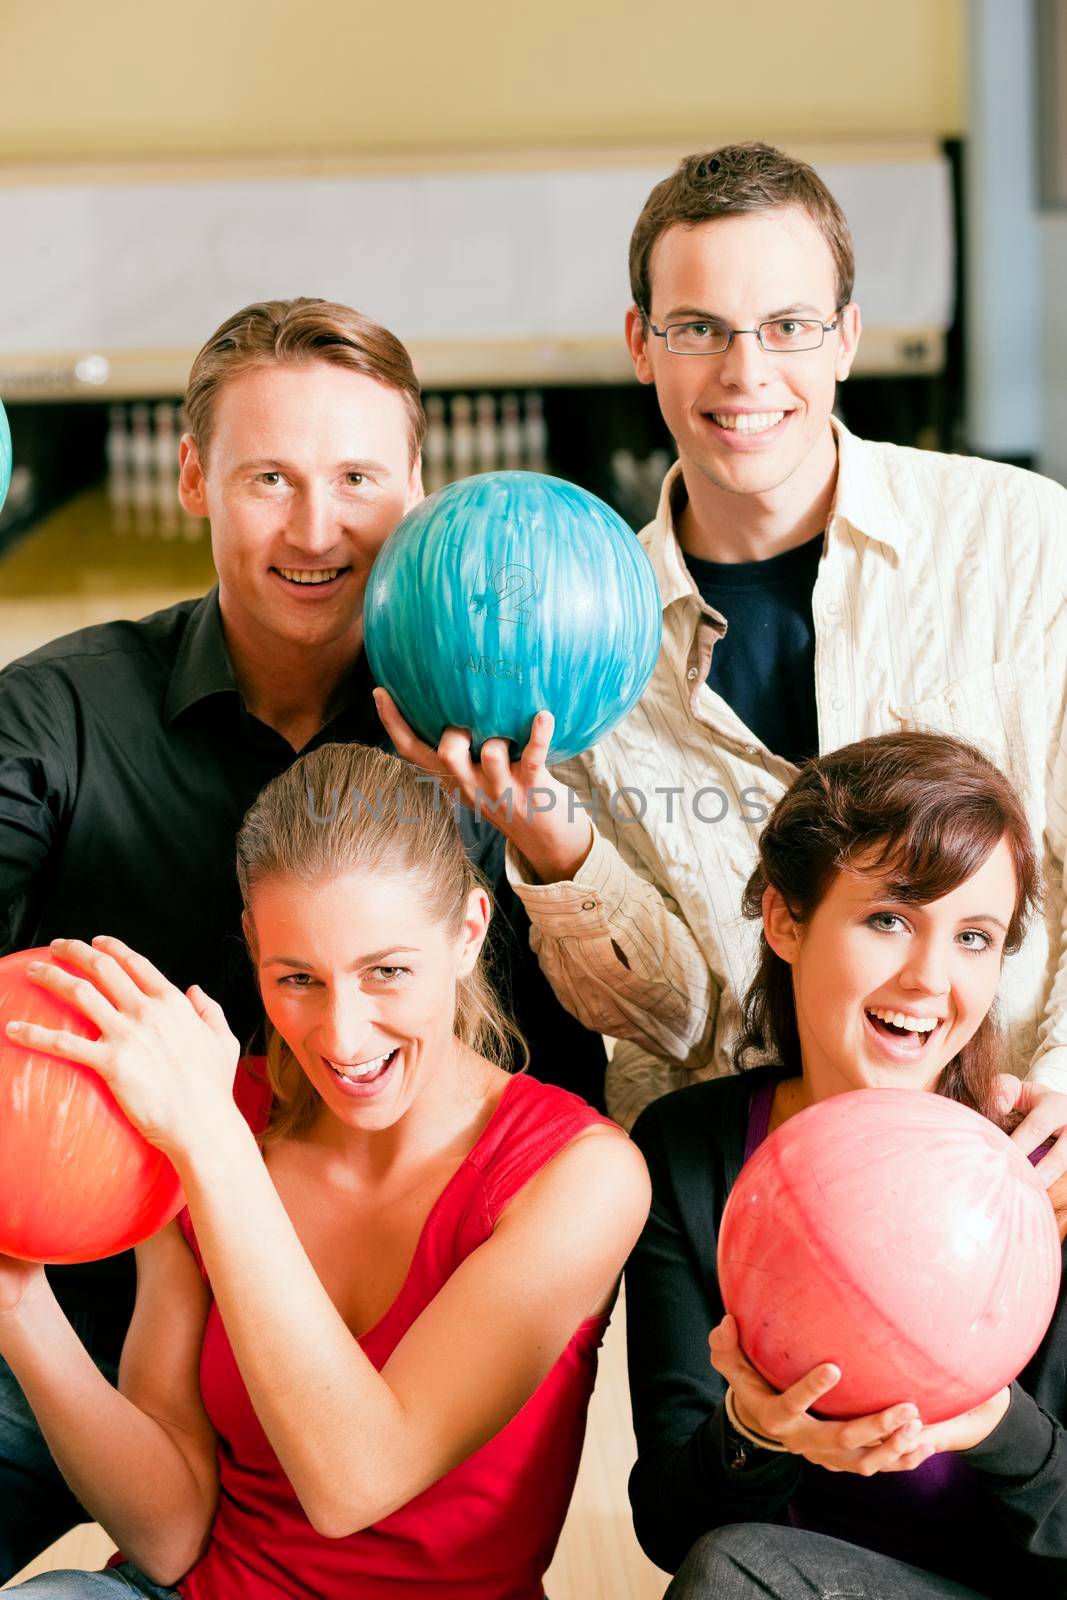 Group of four friends in a bowling alley having fun, holding their bowling balls (focus on girls in front row)